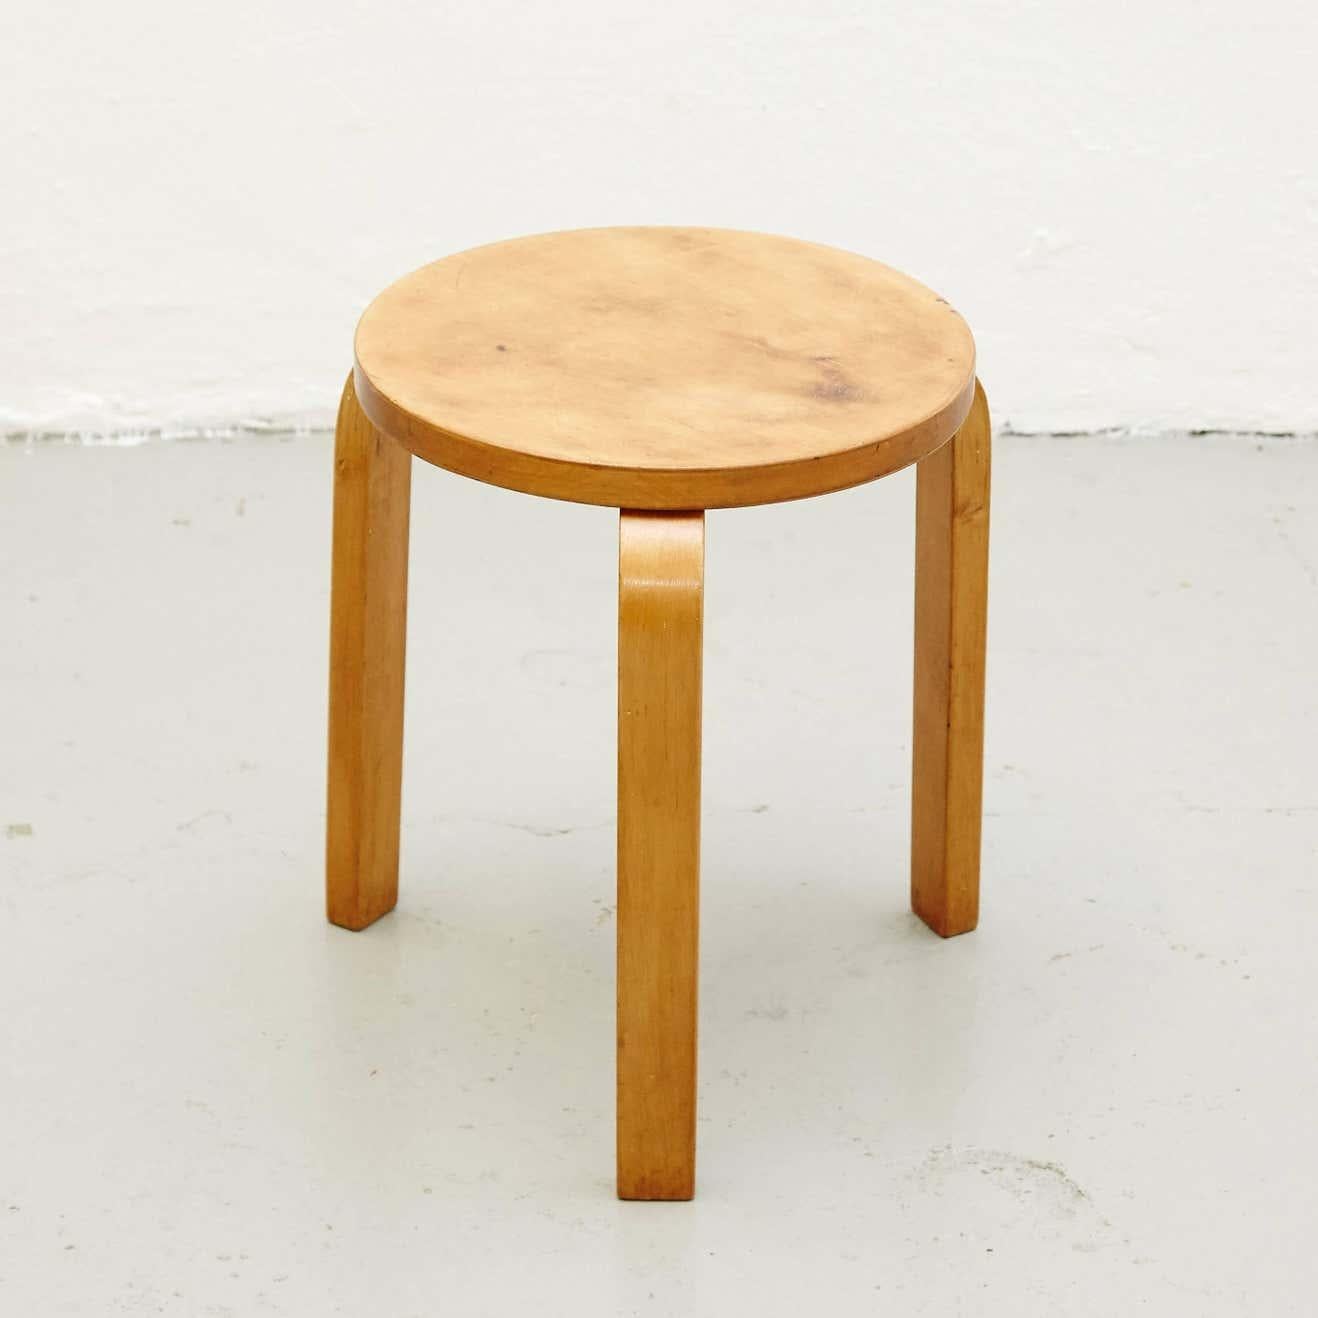 Stool designed by Alvar Aalto, circa 1950.
Manufactured by Artek (Finland.)
Wood legs and structure.

In original condition, with minor wear consistent with age and use, preserving a beautiful patina.

Hugo Alvar Henrik Aalto (1898-1976) was a